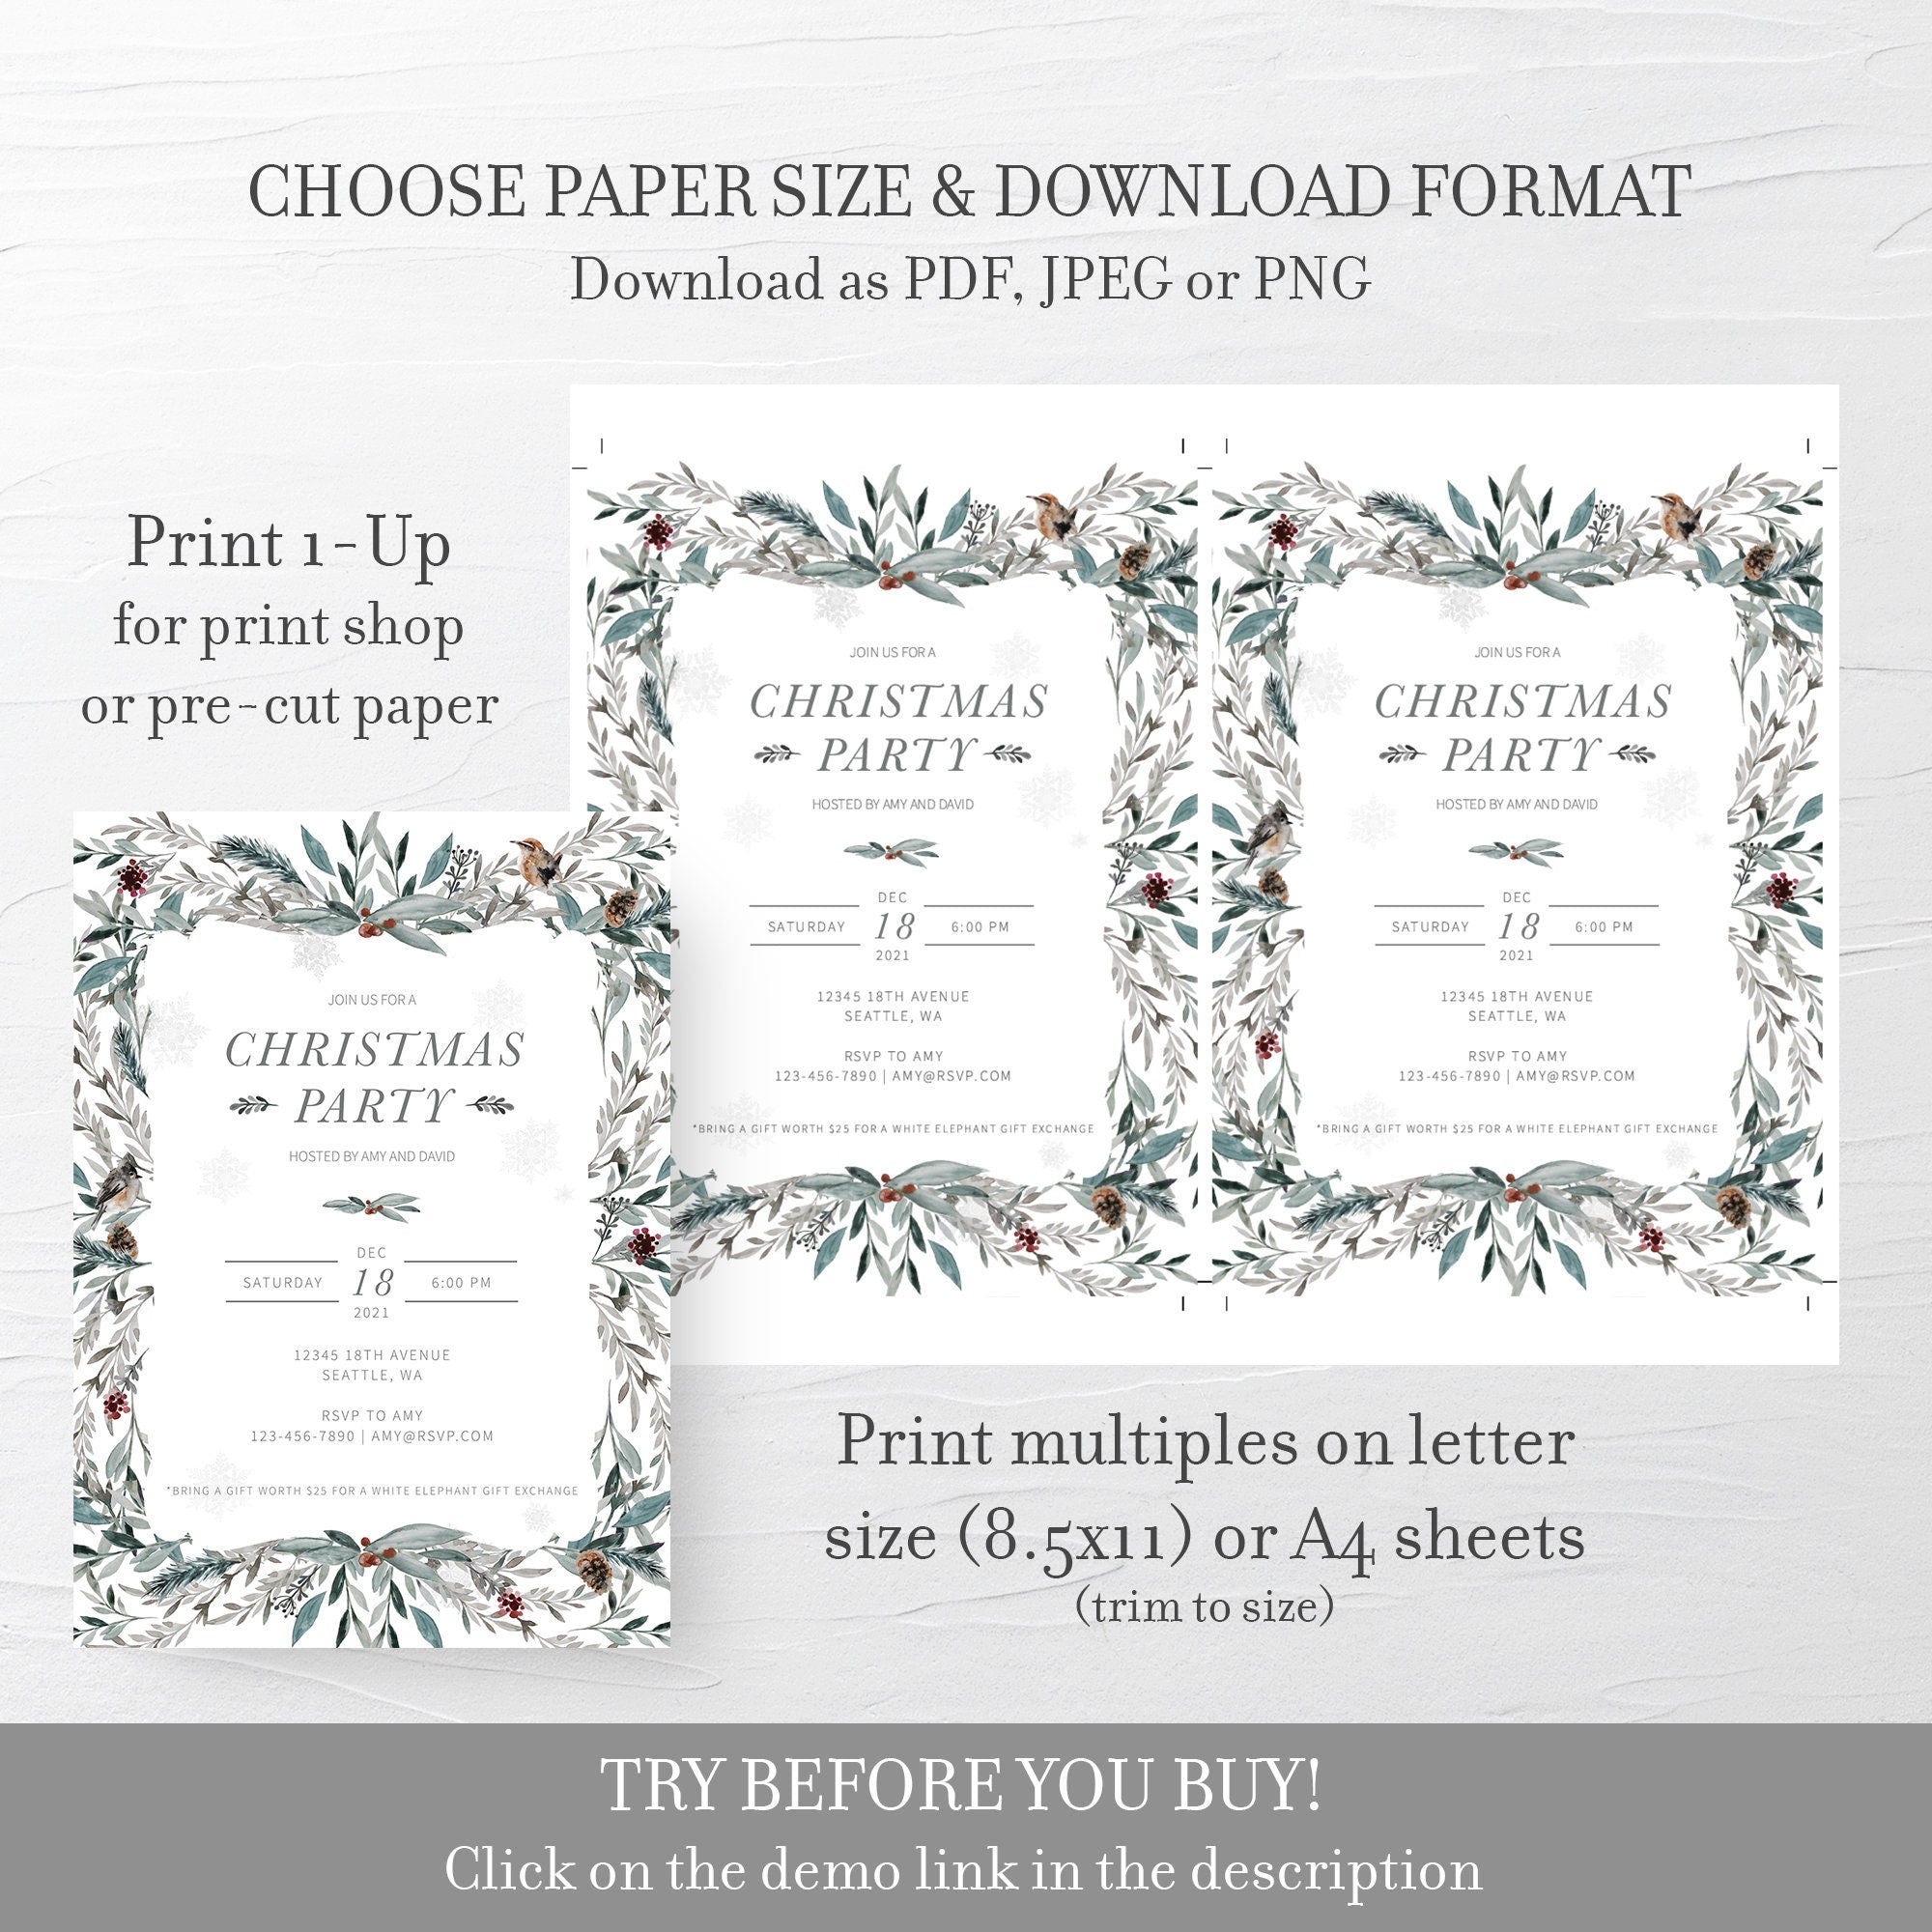 Printable Christmas Party Invitations Instant Download, Friends Christmas Party Invitation, Christmas Party Invites Editable Template, FB100